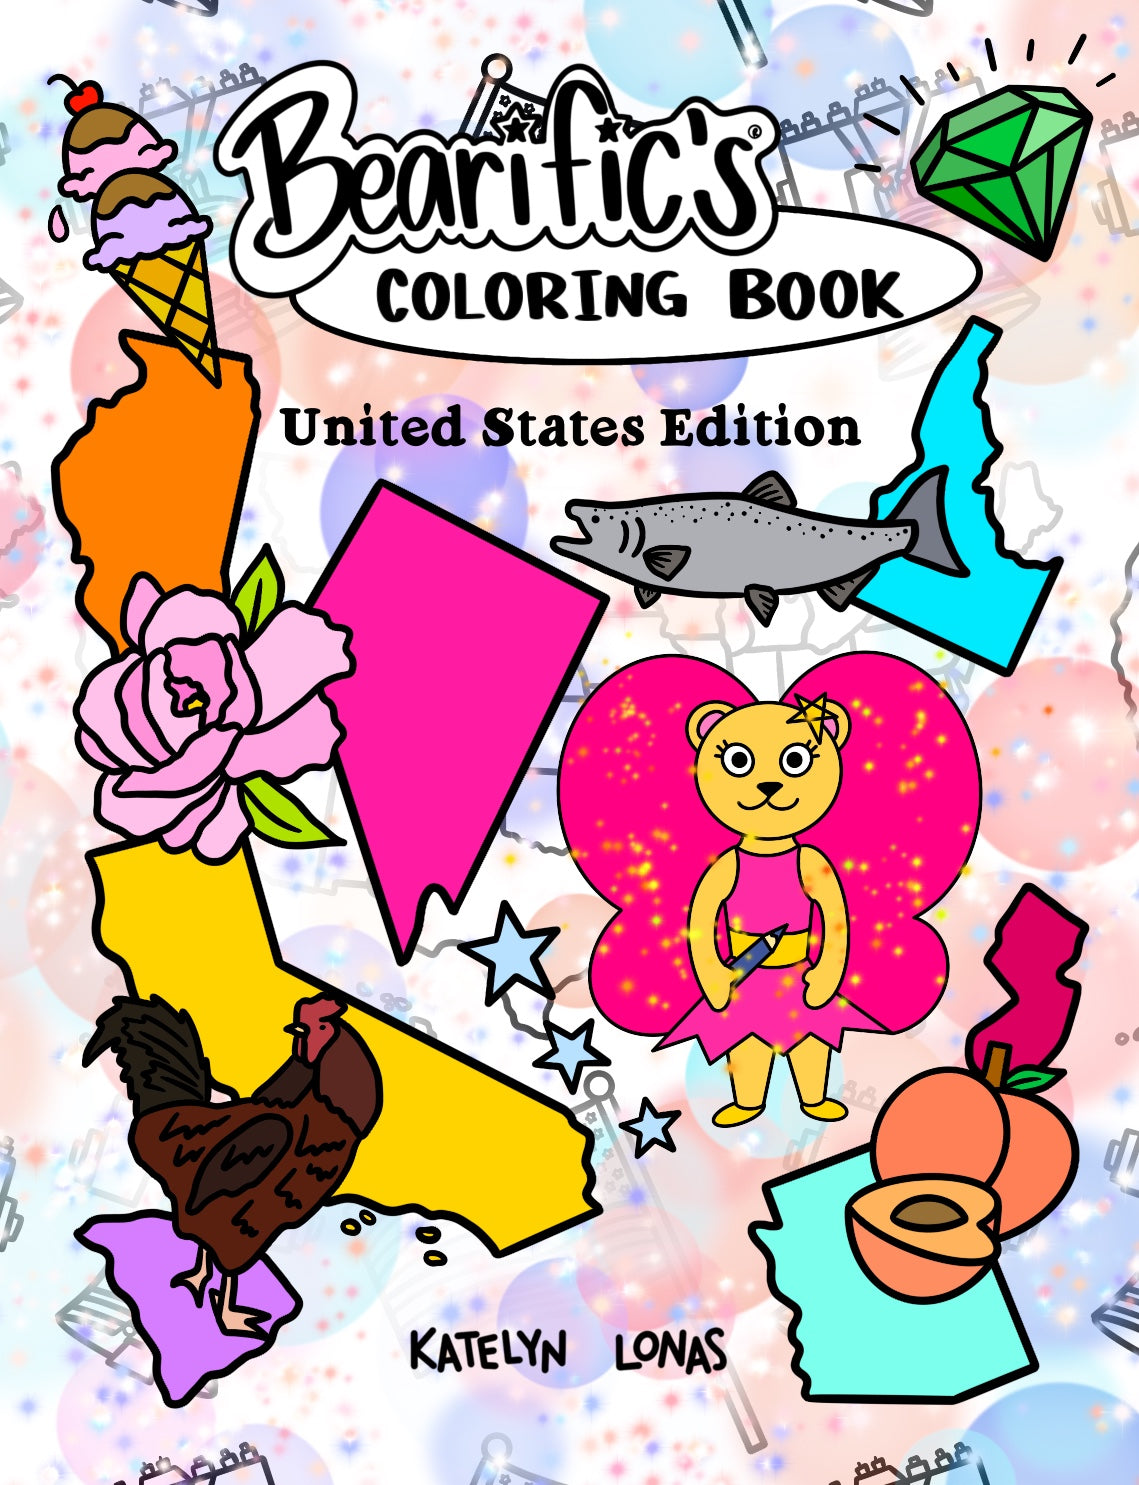 Bearific's Coloring Book: United States Edition